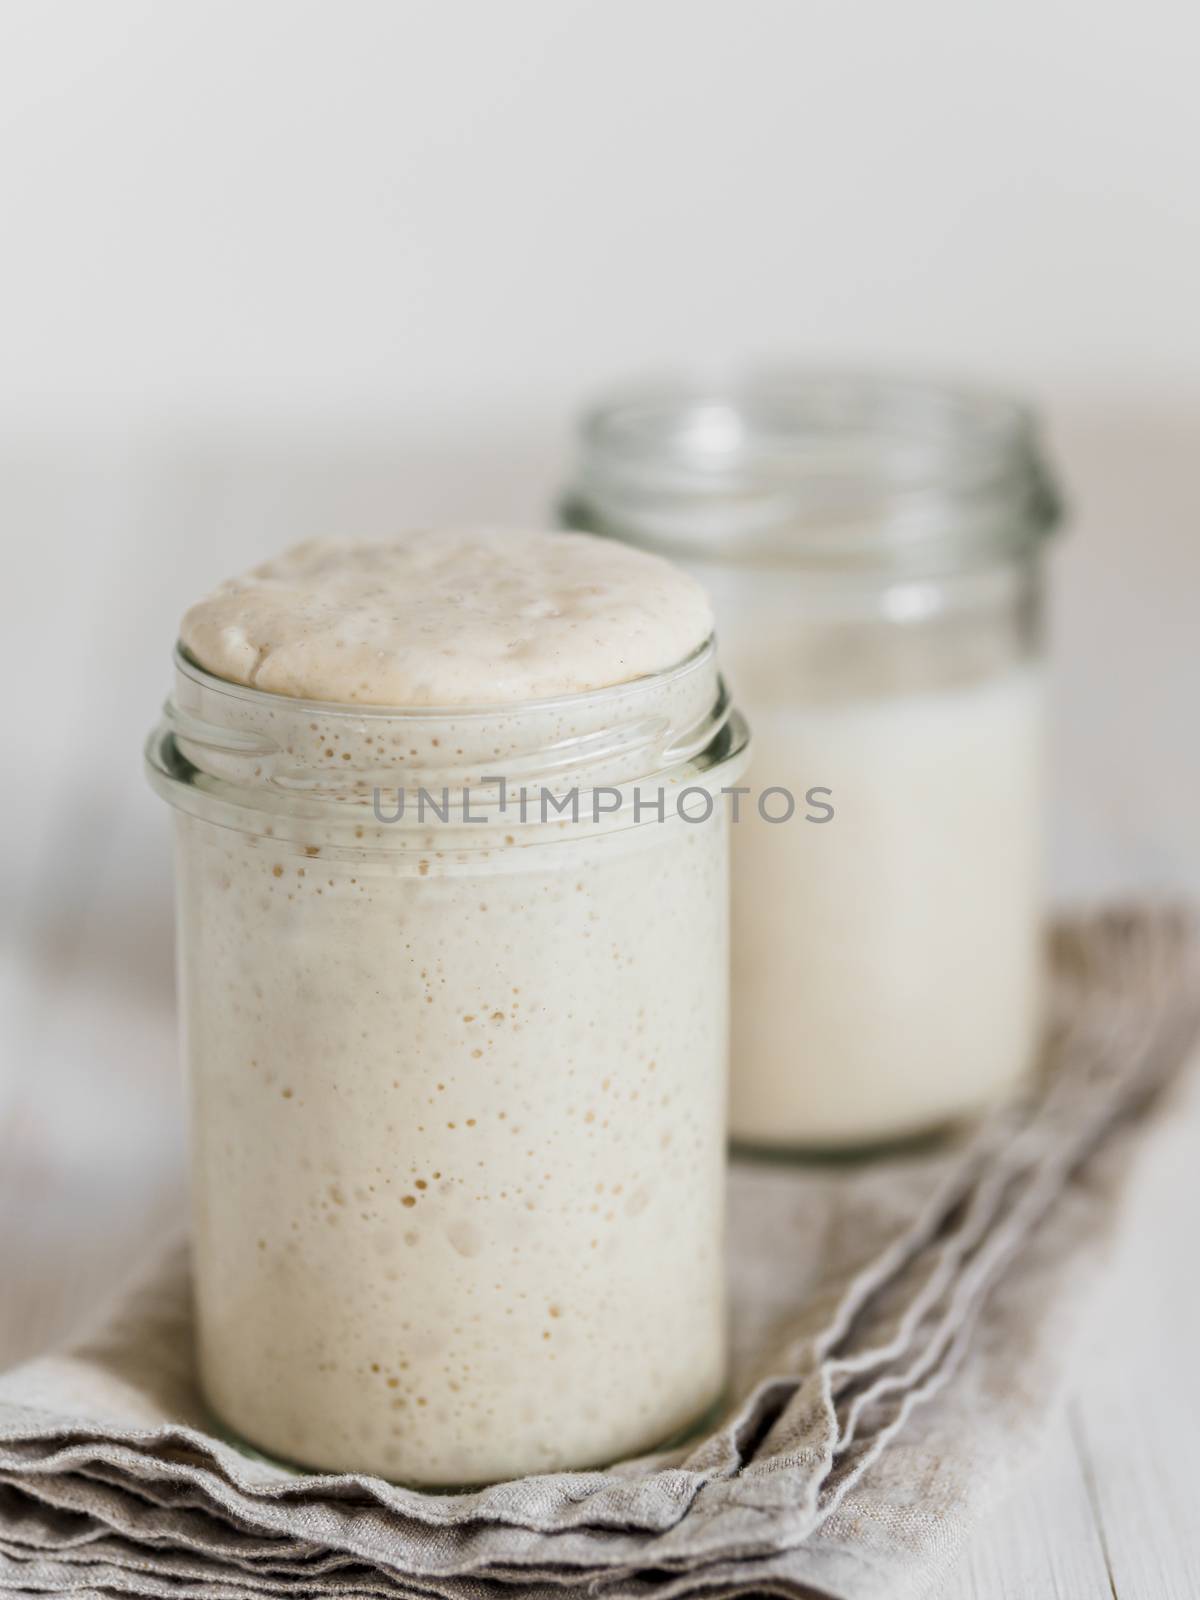 Wheat sourdough starter different hydration levels by fascinadora